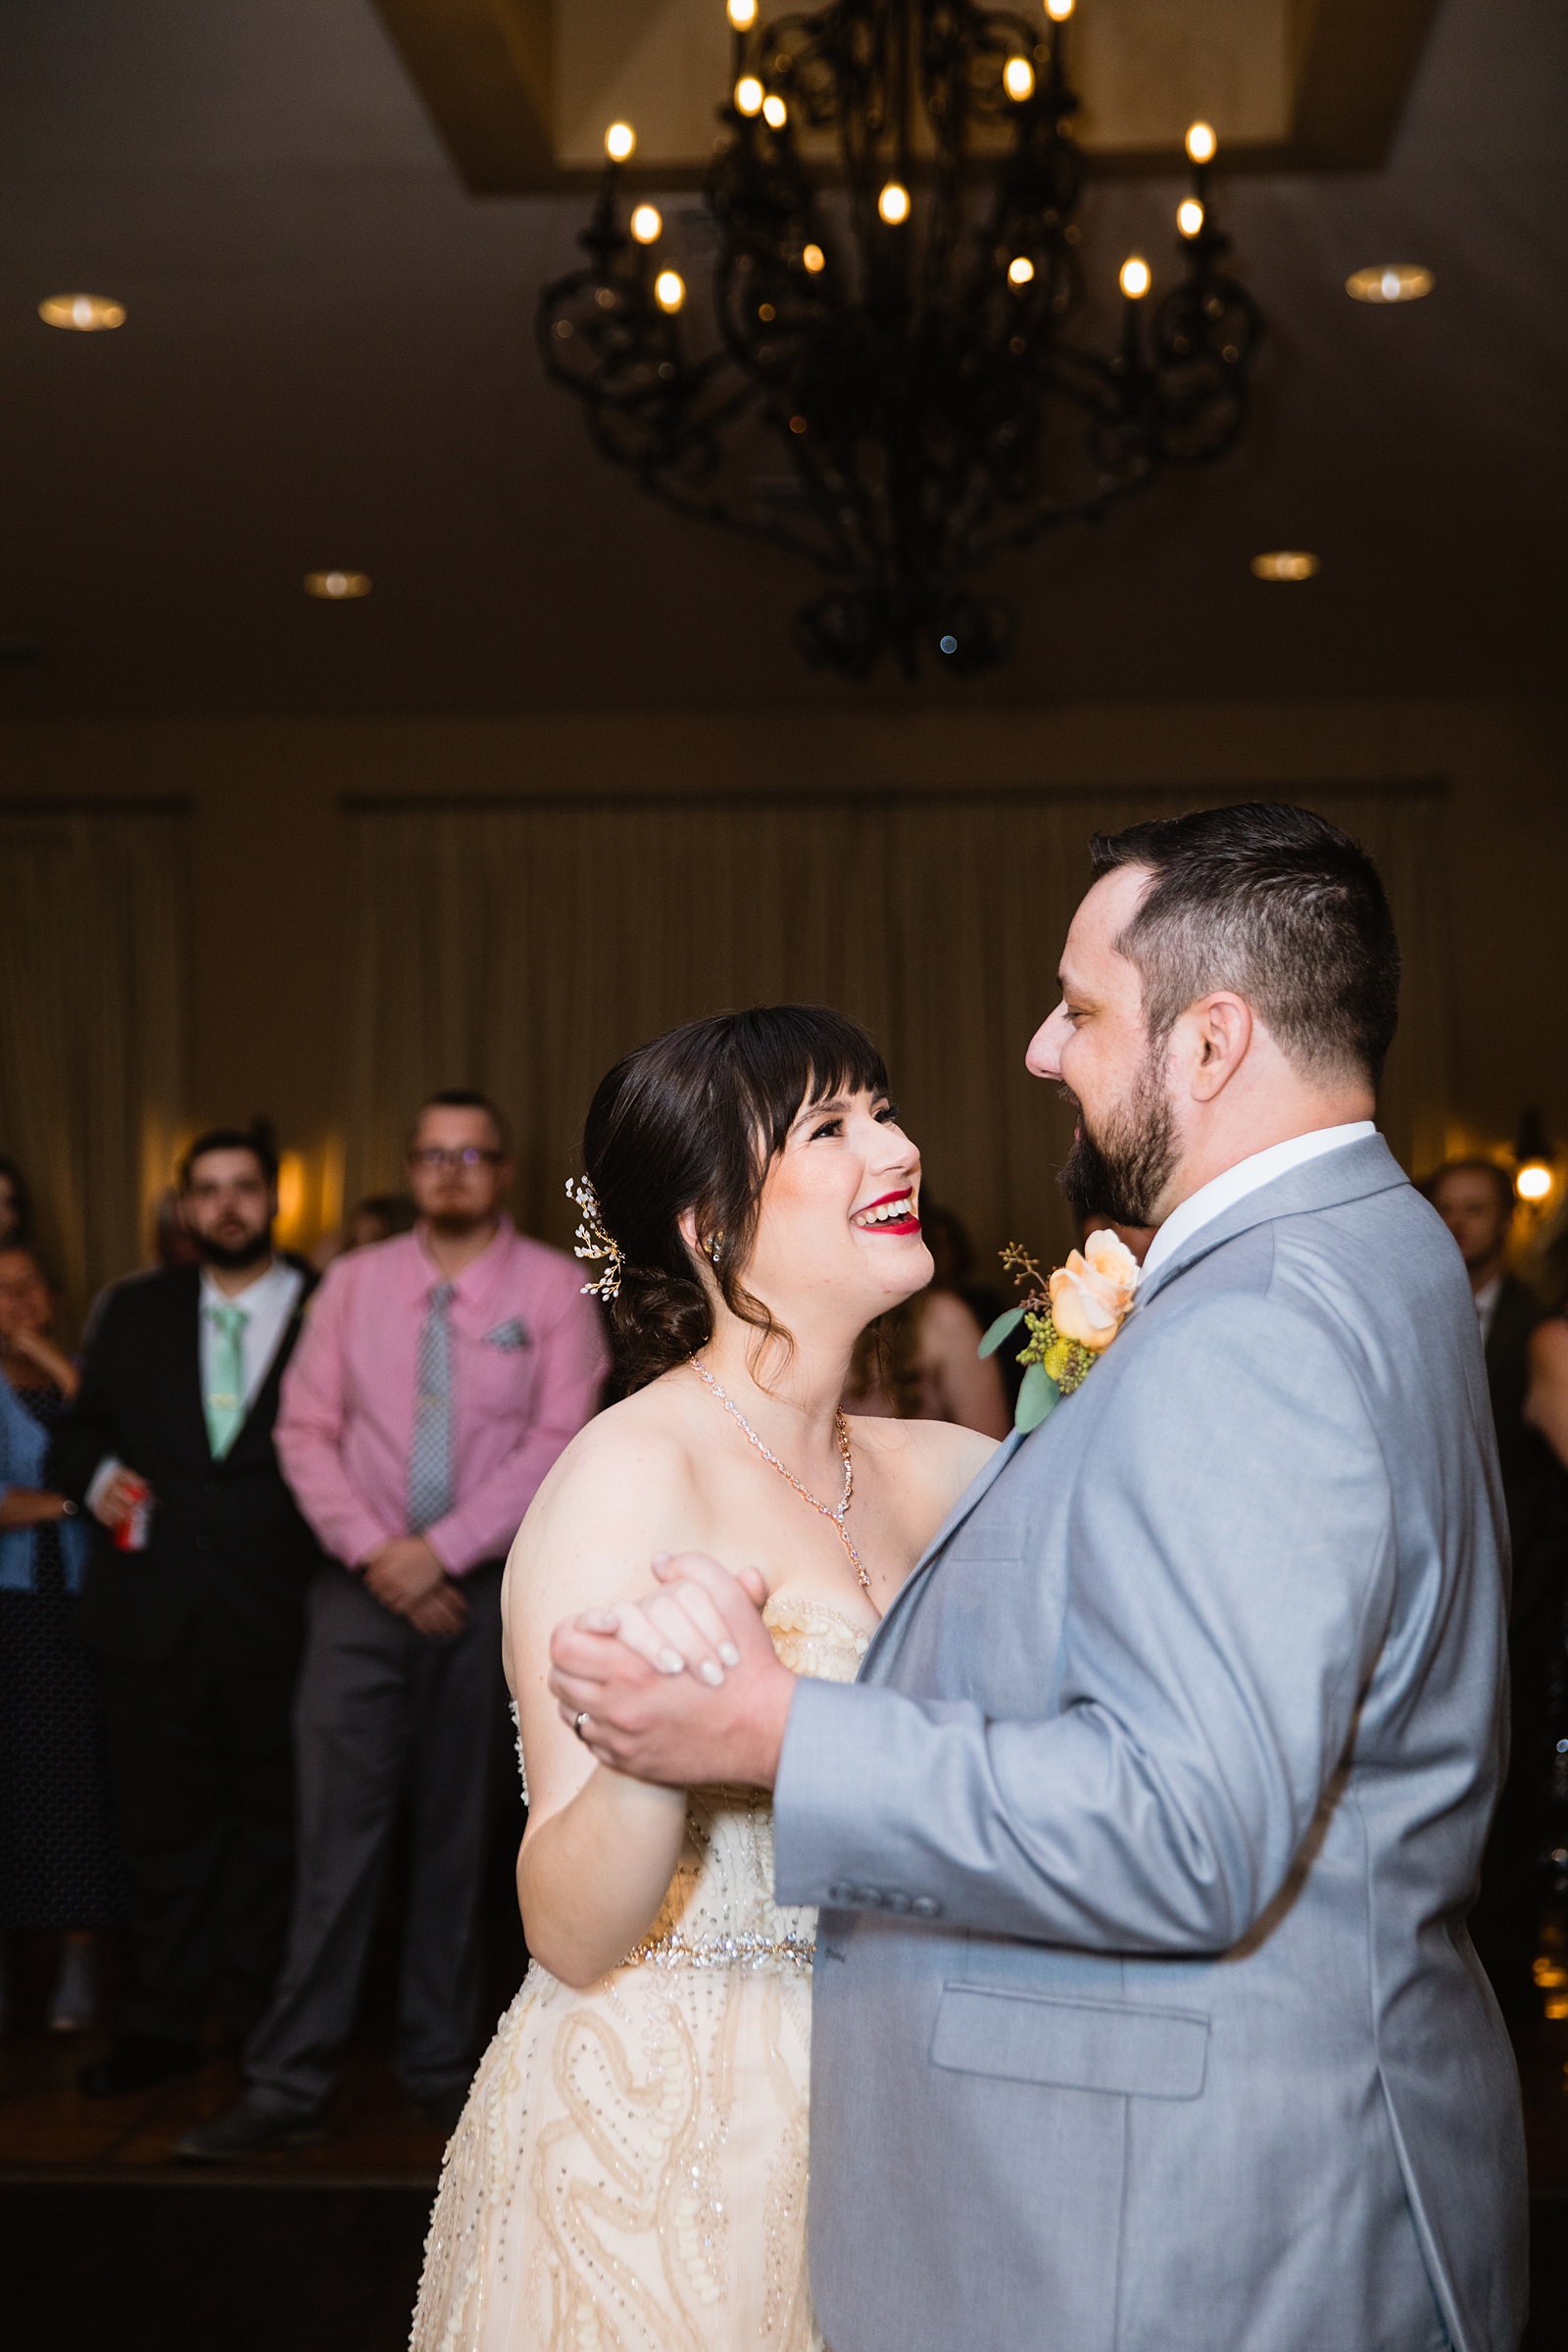 Bride and Groom sharing first dance at their Bella Rose Estate wedding reception by Arizona wedding photographer PMA Photography.